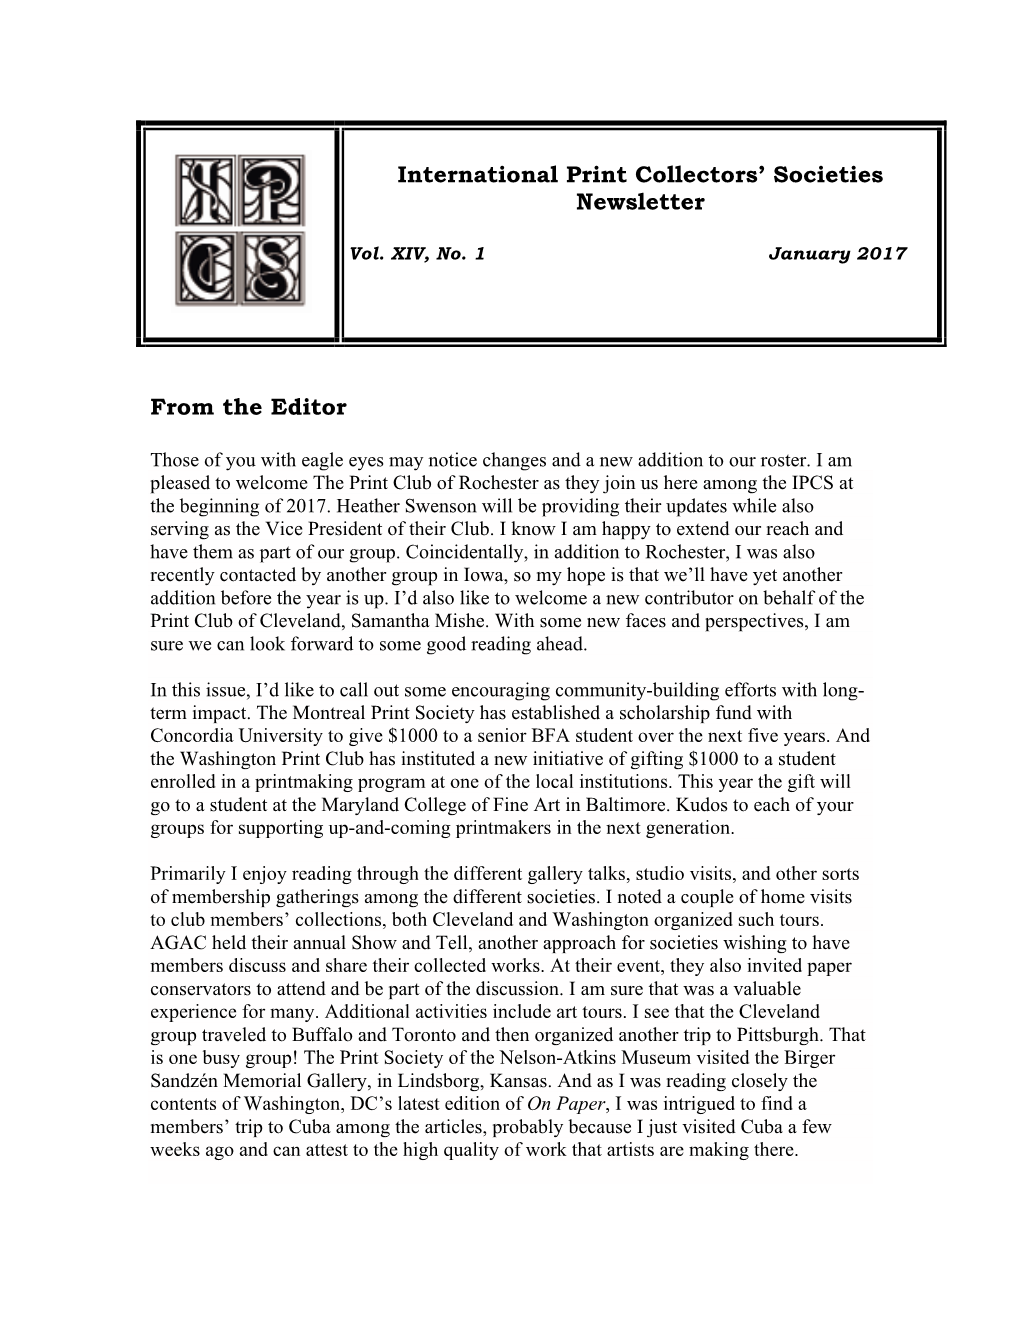 International Print Collectors' Societies Newsletter from the Editor